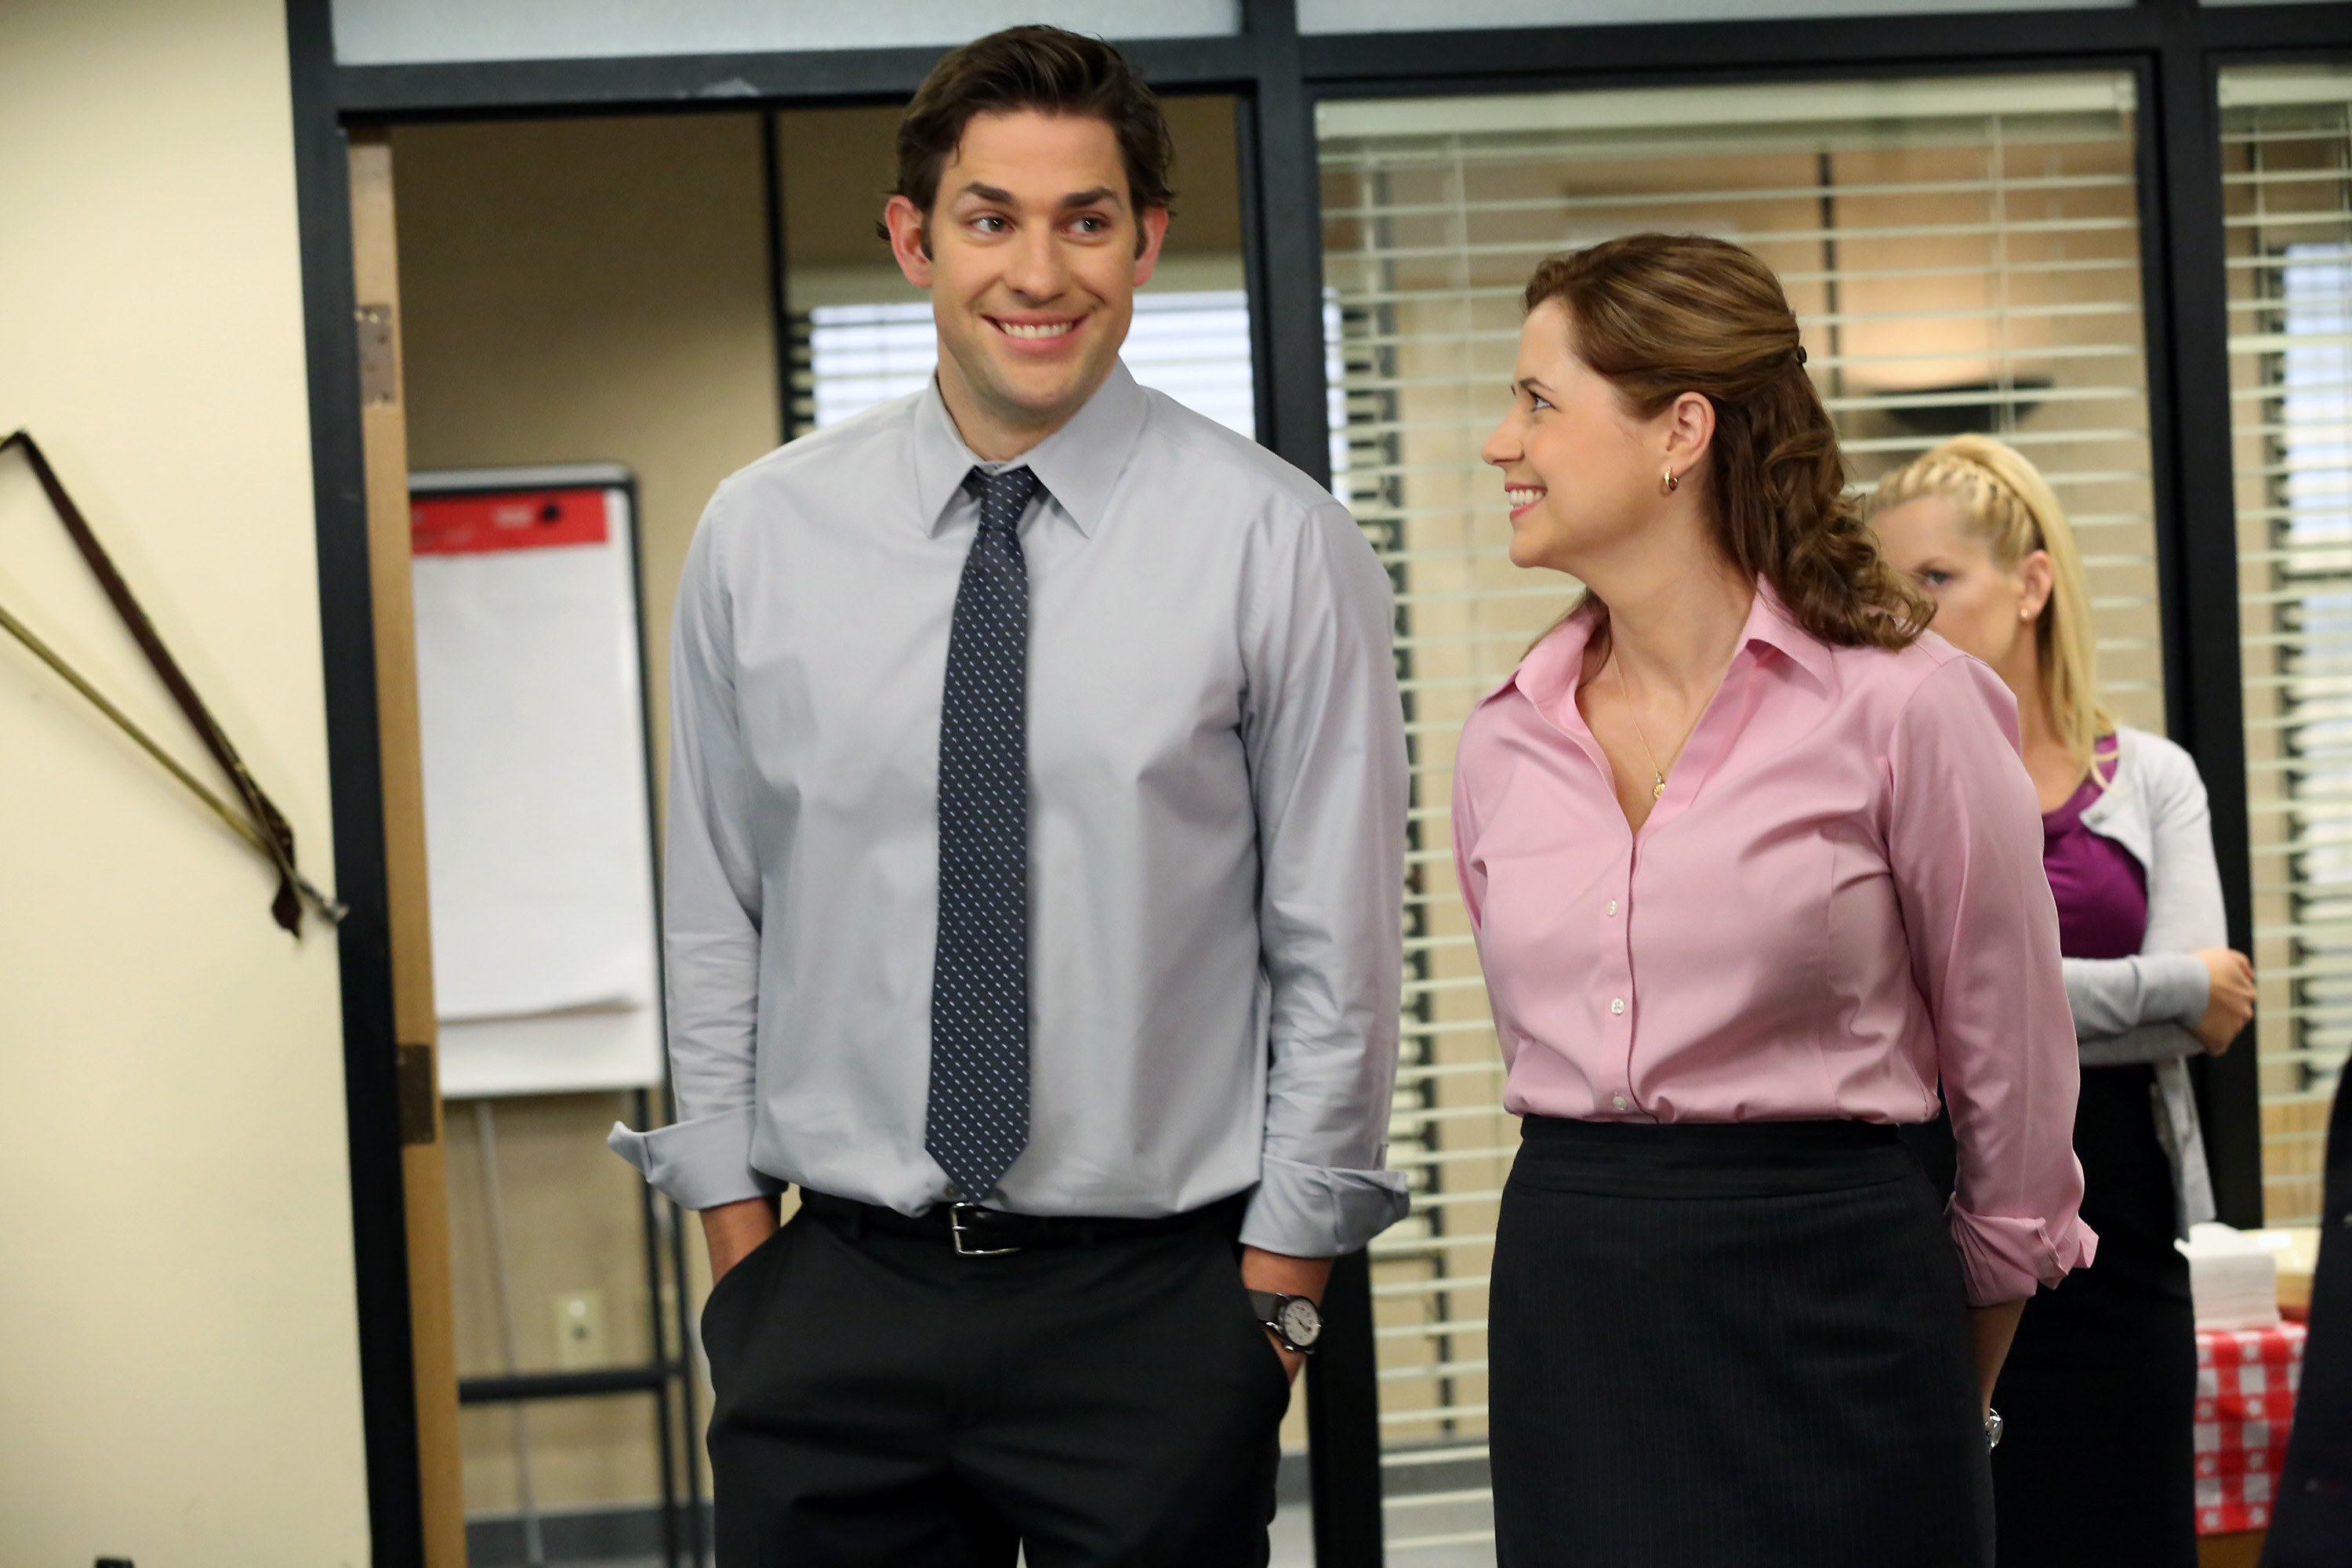 Jim stands next to Pam with his hands in his pockets